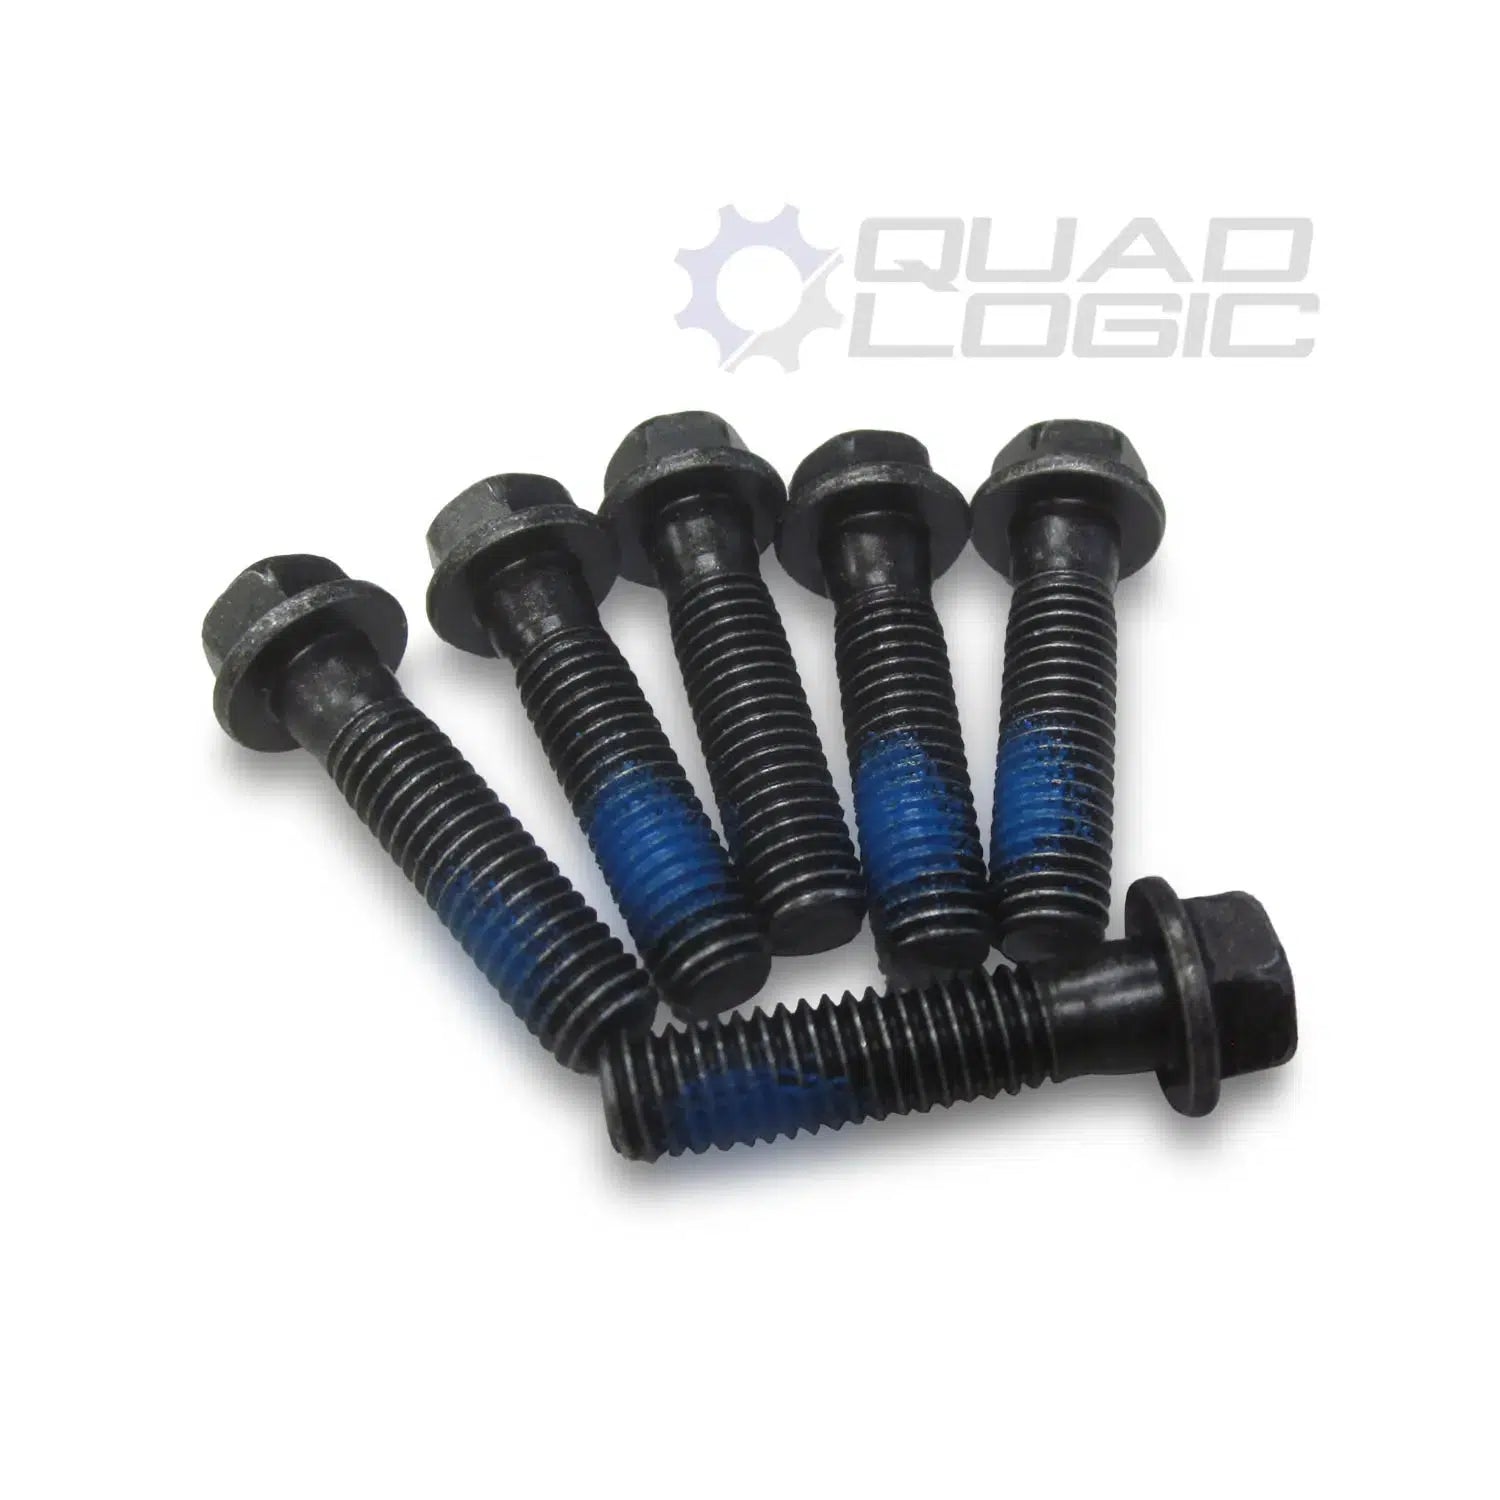 RZR XP 1000 Engine Bolts – Oil Pan, Stator Cover, Intake Boots, Water Pump Cover-Engine Bolts-Quad-Logic-Pair-Black Market UTV